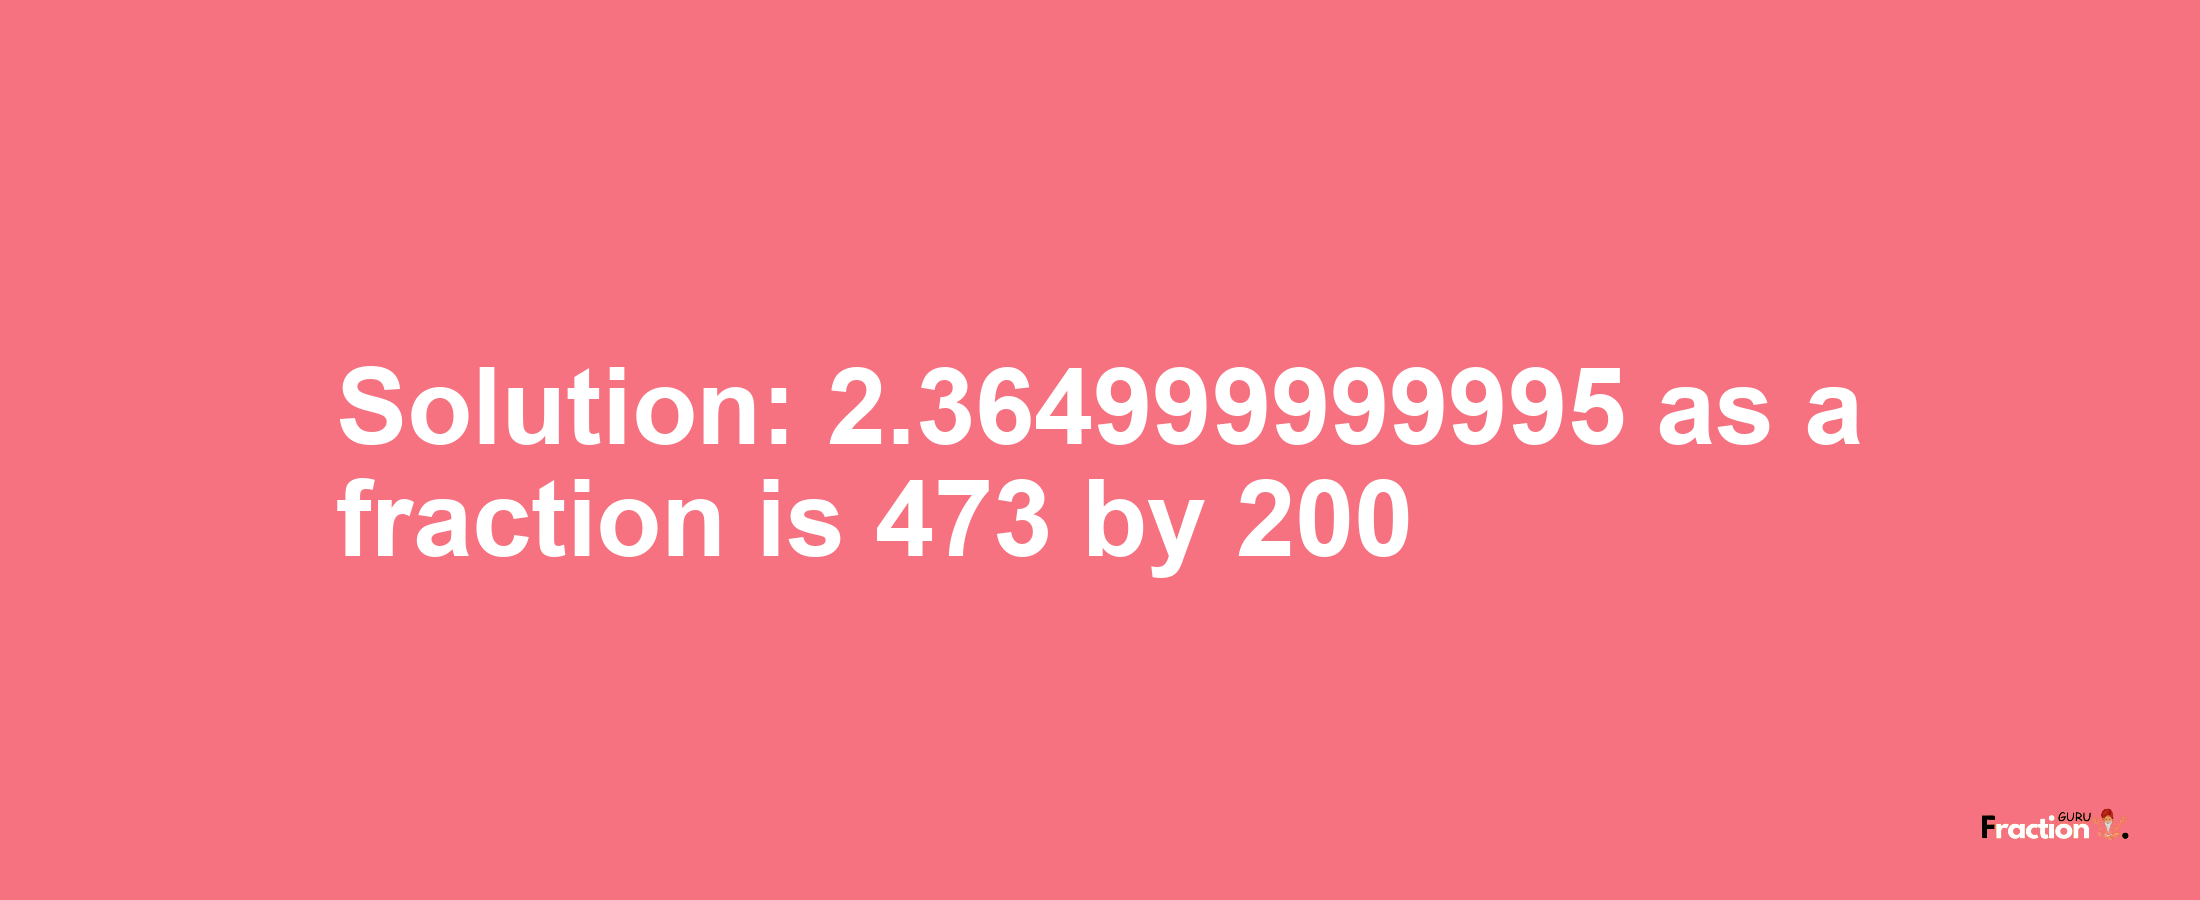 Solution:2.364999999995 as a fraction is 473/200